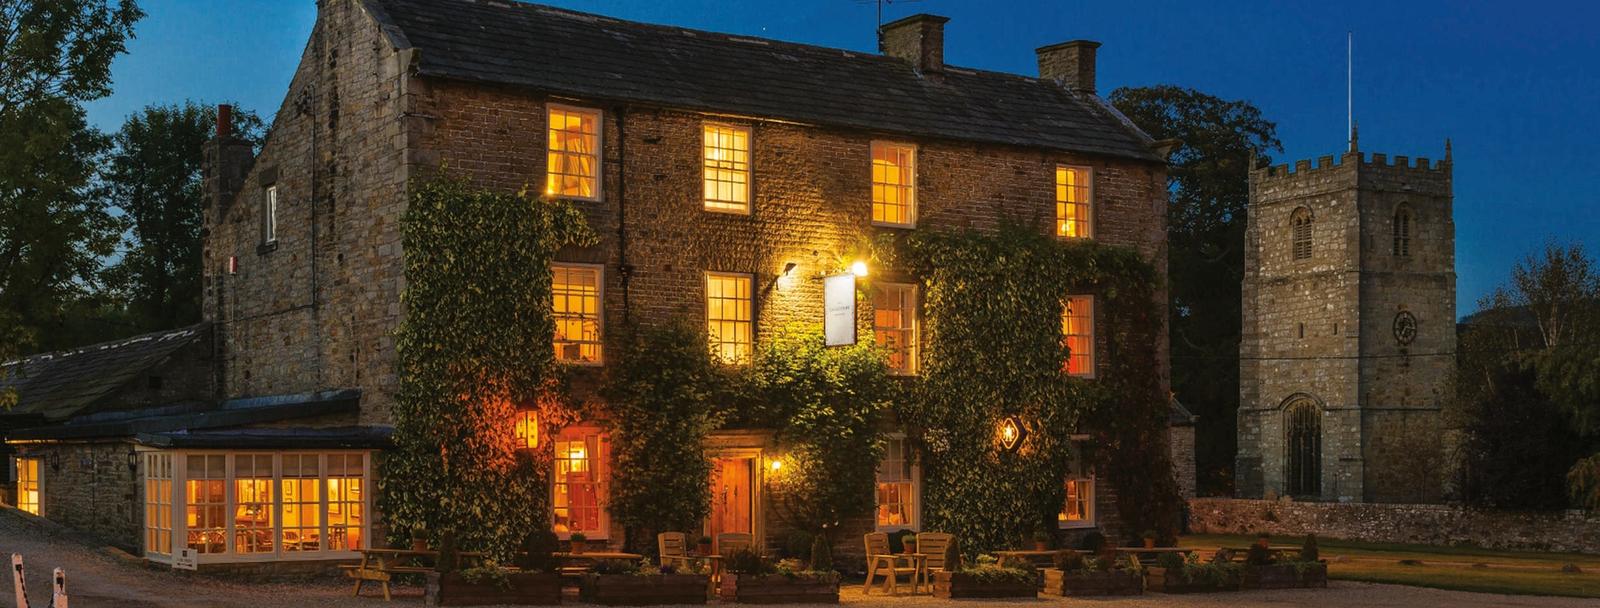 Best gastro pubs with rooms in North East